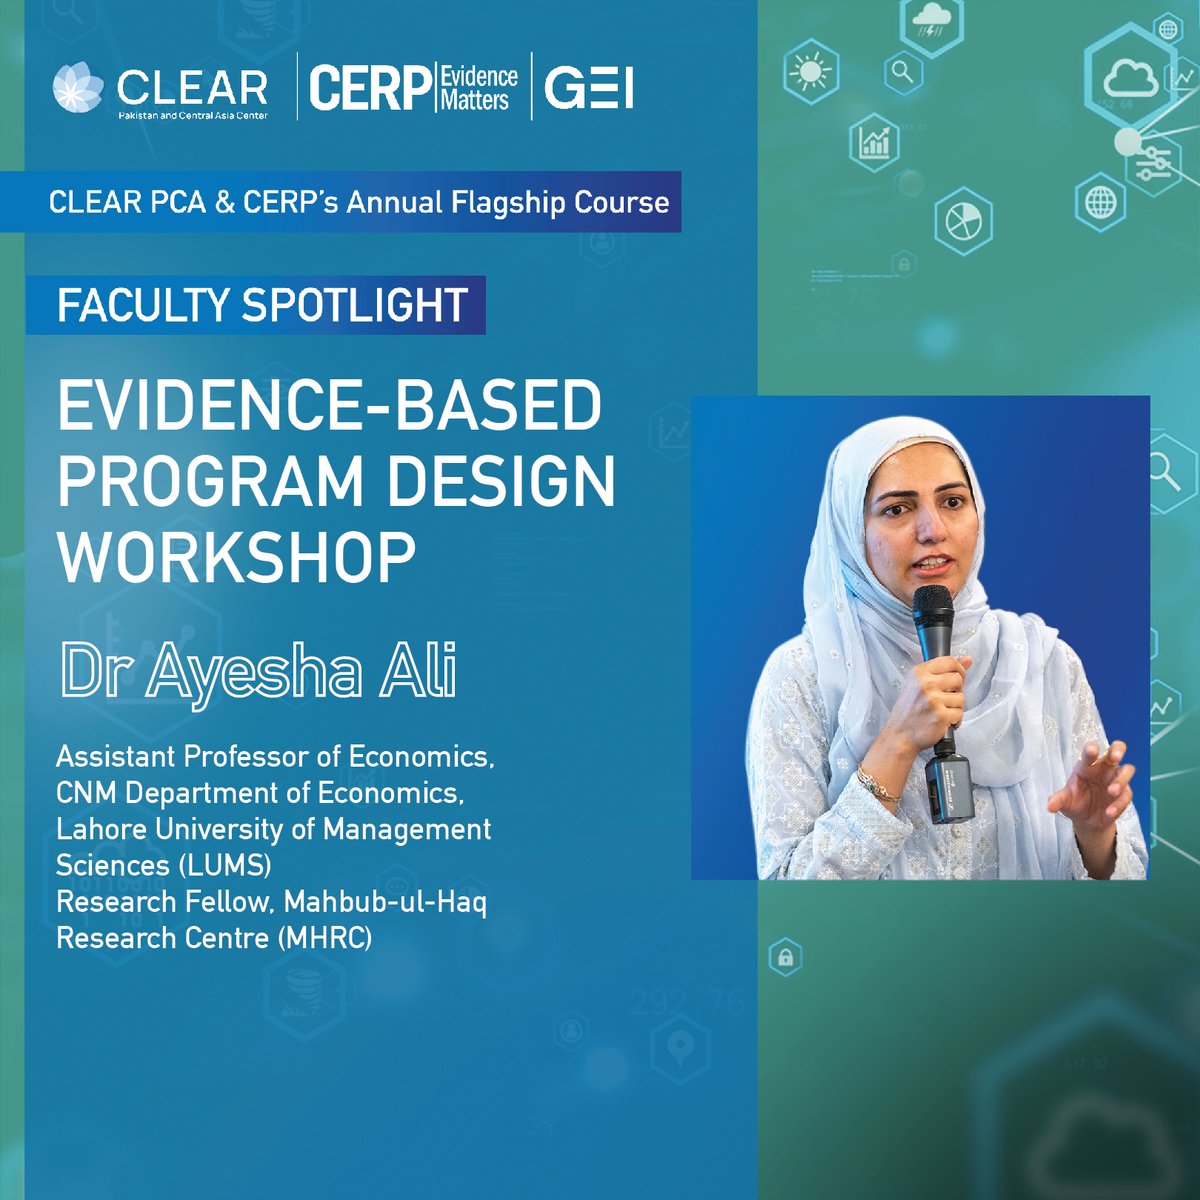 @CERPakistan @GEI_GlobalEval @GhazalaMansuri @MaroofAliSyed @Princeton @AndlingerCenter @_farahsaid @HaqMahbub @LifeAtLUMS @adeelshafqat83 @EconomicsLUMS @nazish_afraz #FacultySpotlight for #EBPD2023

Our Evidence-Based Program Design workshop now embeds a climate perspective across all modules, ensuring you're equipped to craft policies that create sustainable impact and cater to climate issues.

@CERPakistan 
@GEI_GlobalEval